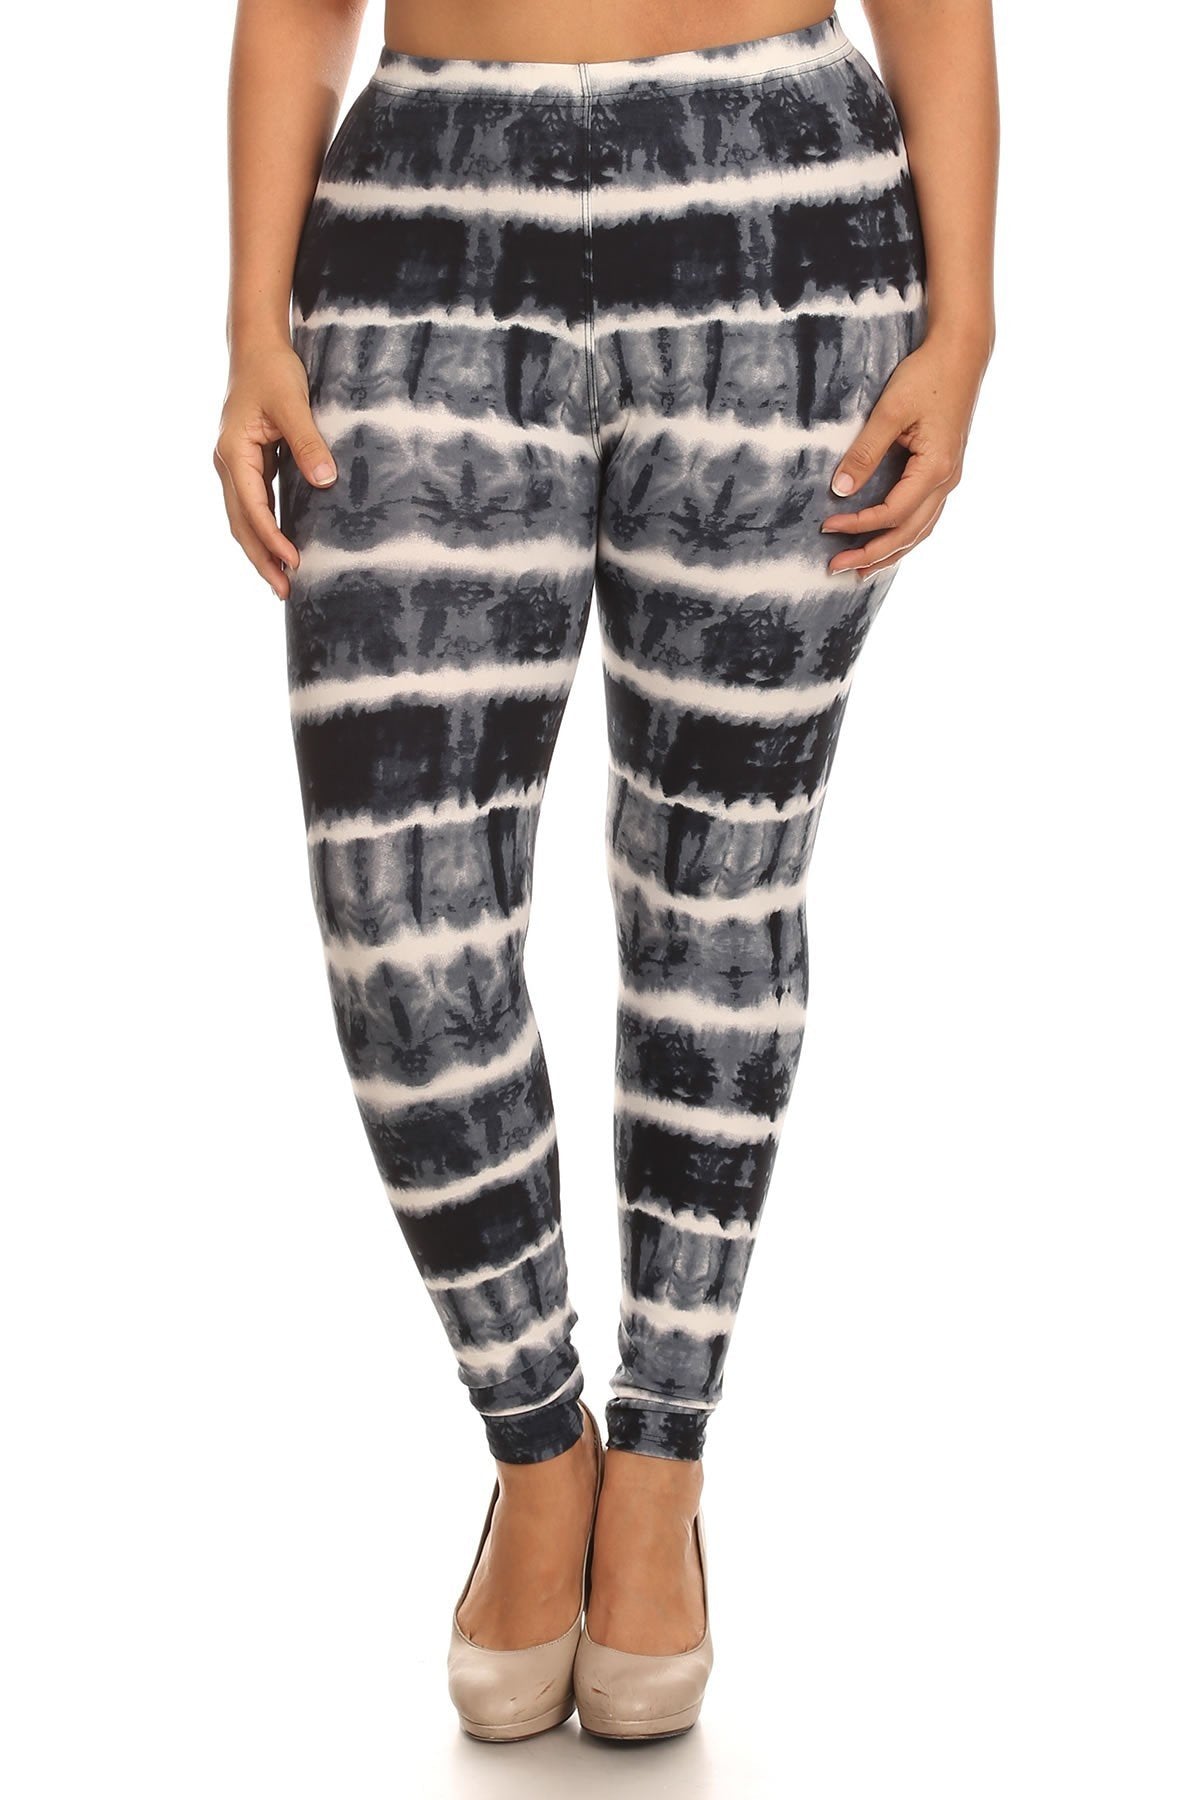 Plus Size Tie Dye Print, Full Length Leggings In A Fitted Style With A Banded High Waist - K I T S H O P 